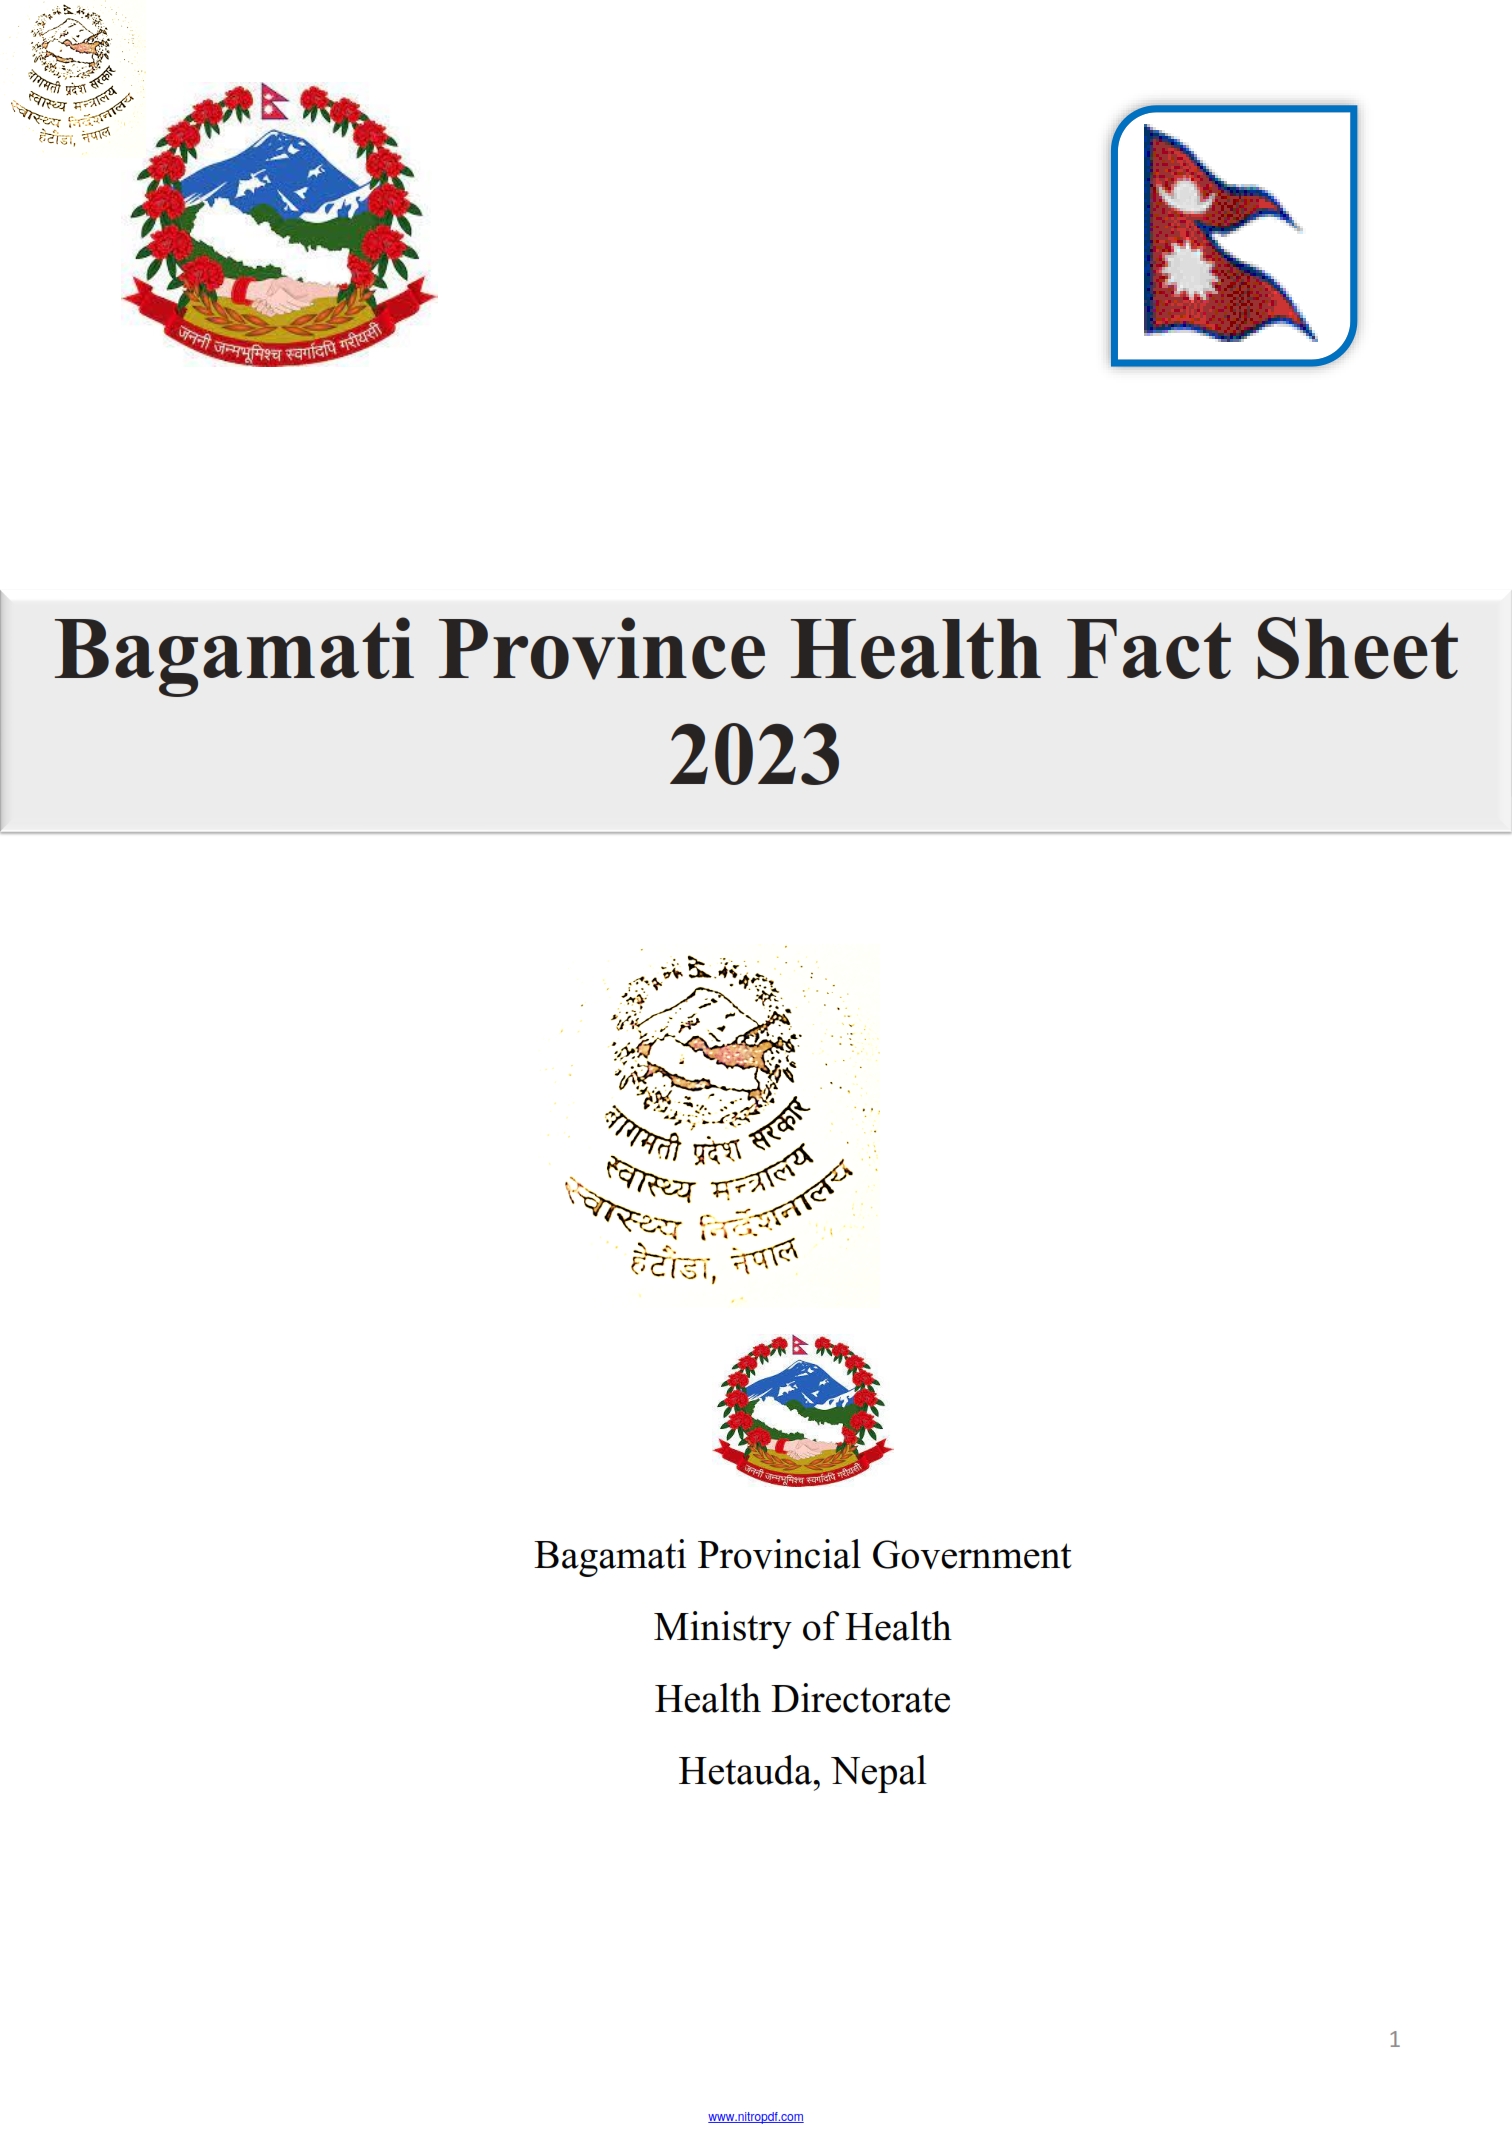 FACT SHEET OF BAGAMATI PROVINCE FISCAL YEAR 2079/80